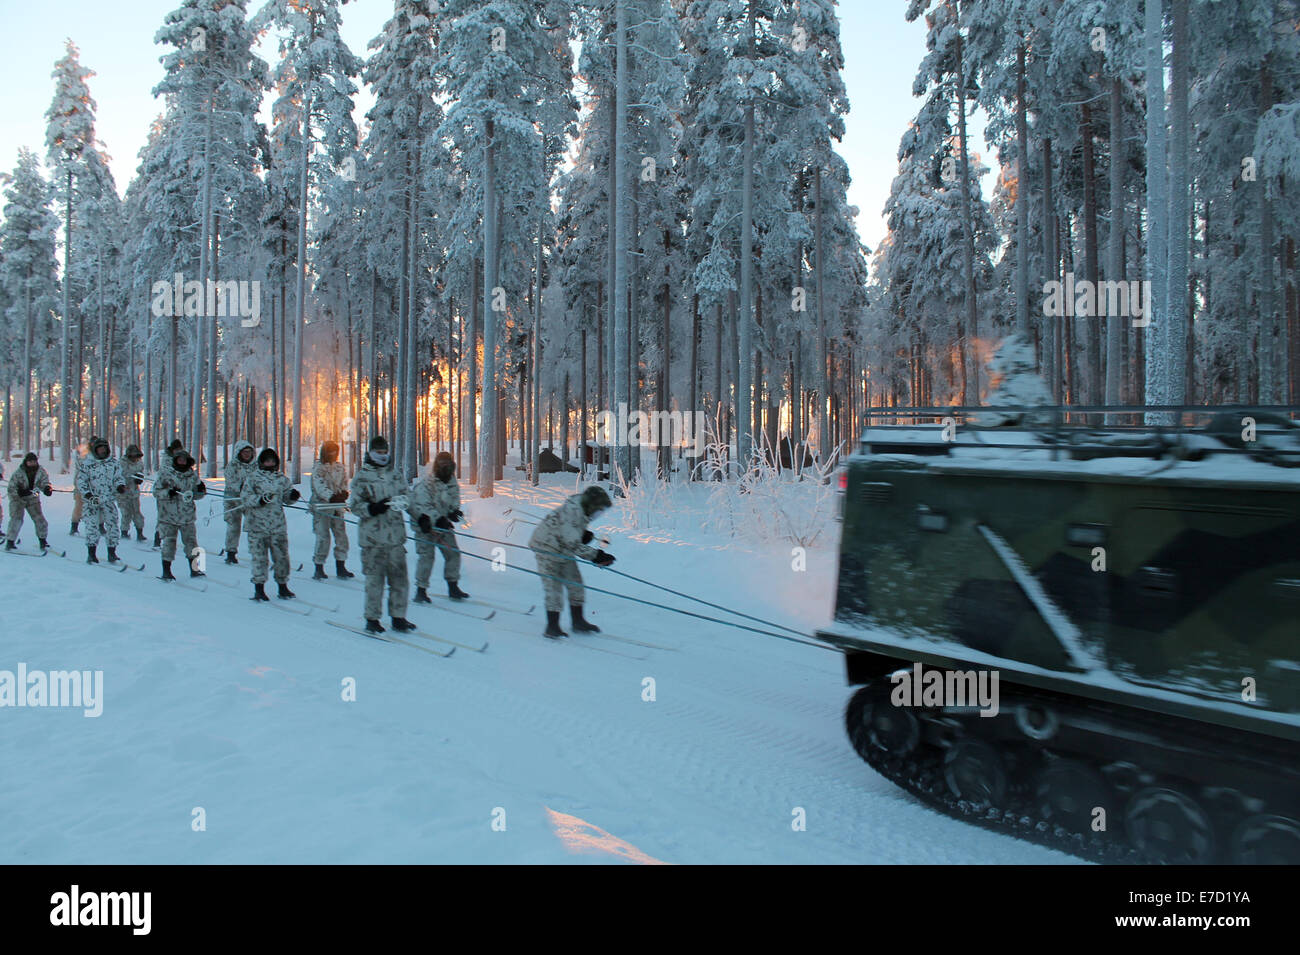 Soldiers pulled behind a truck on skies in Finland Stock Photo